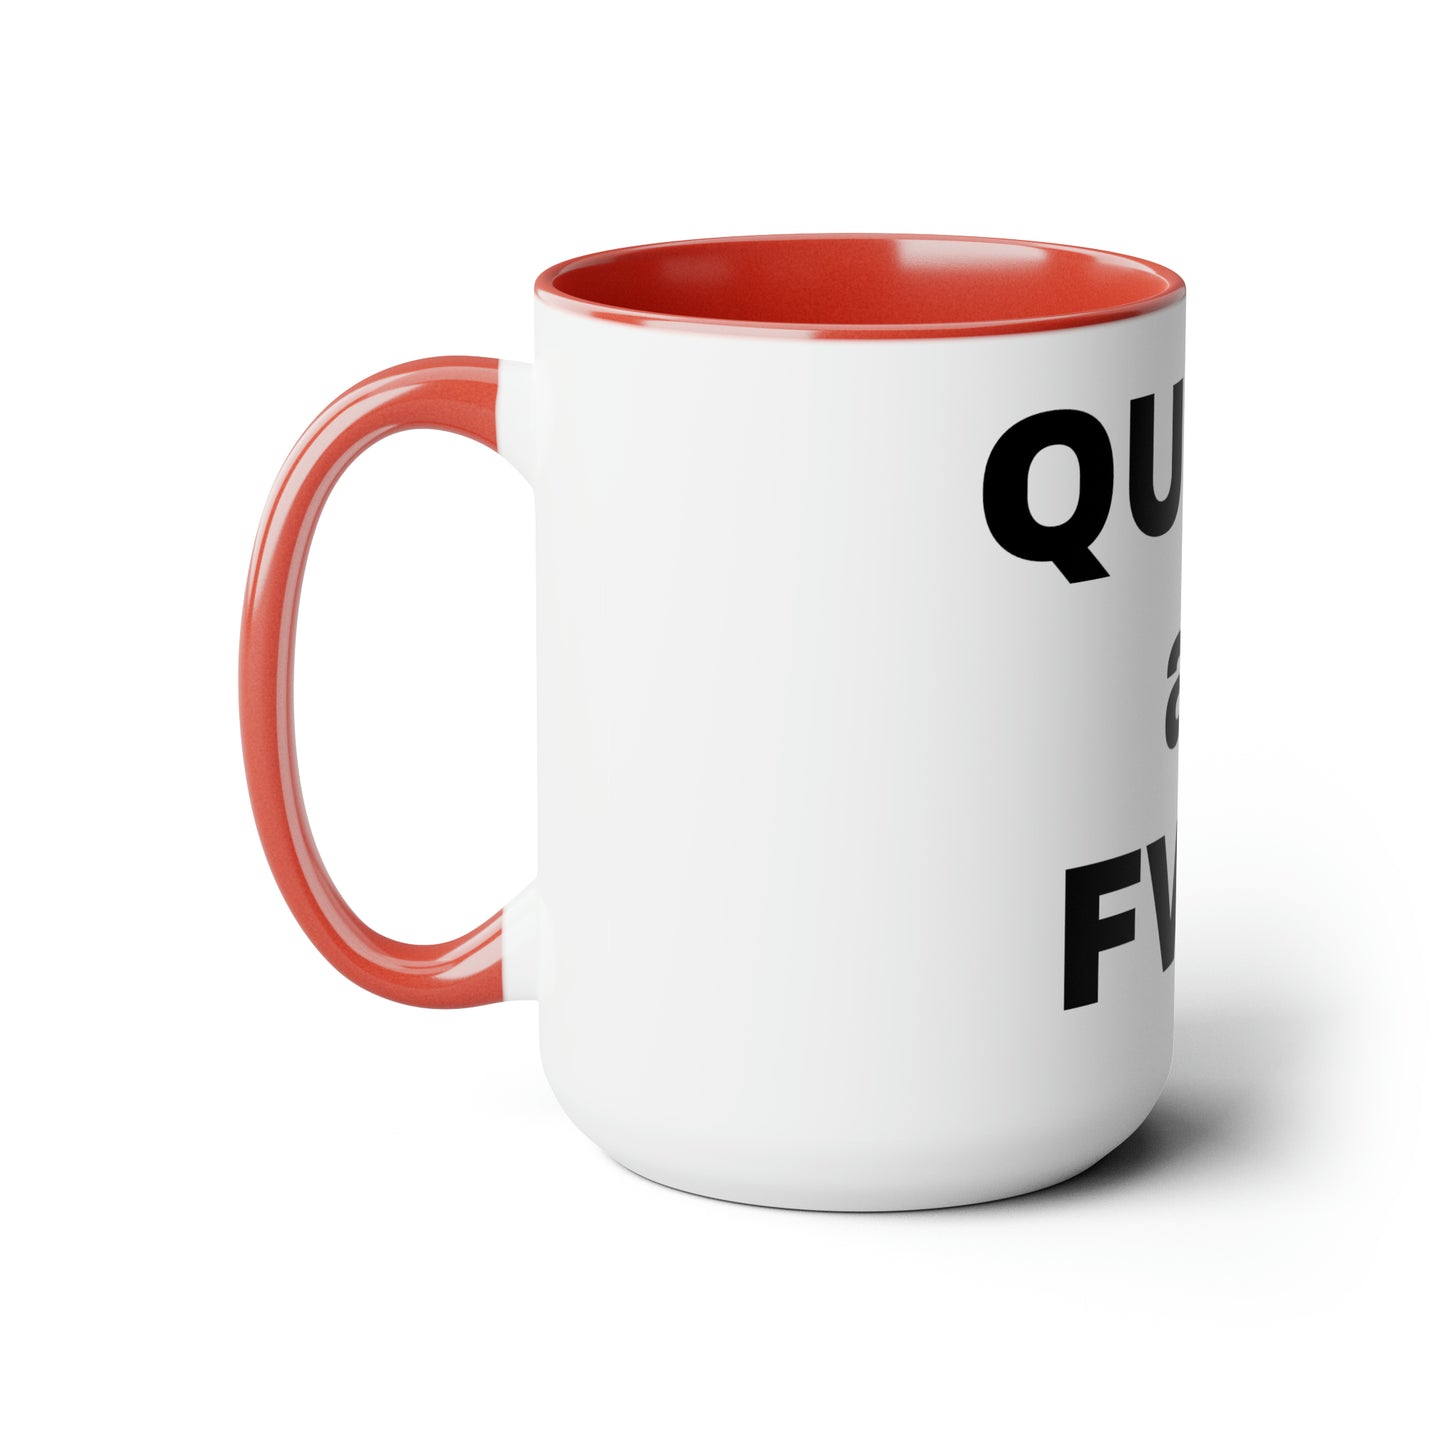 QUEER as FVCK Two-Tone Coffee Mugs, 15oz